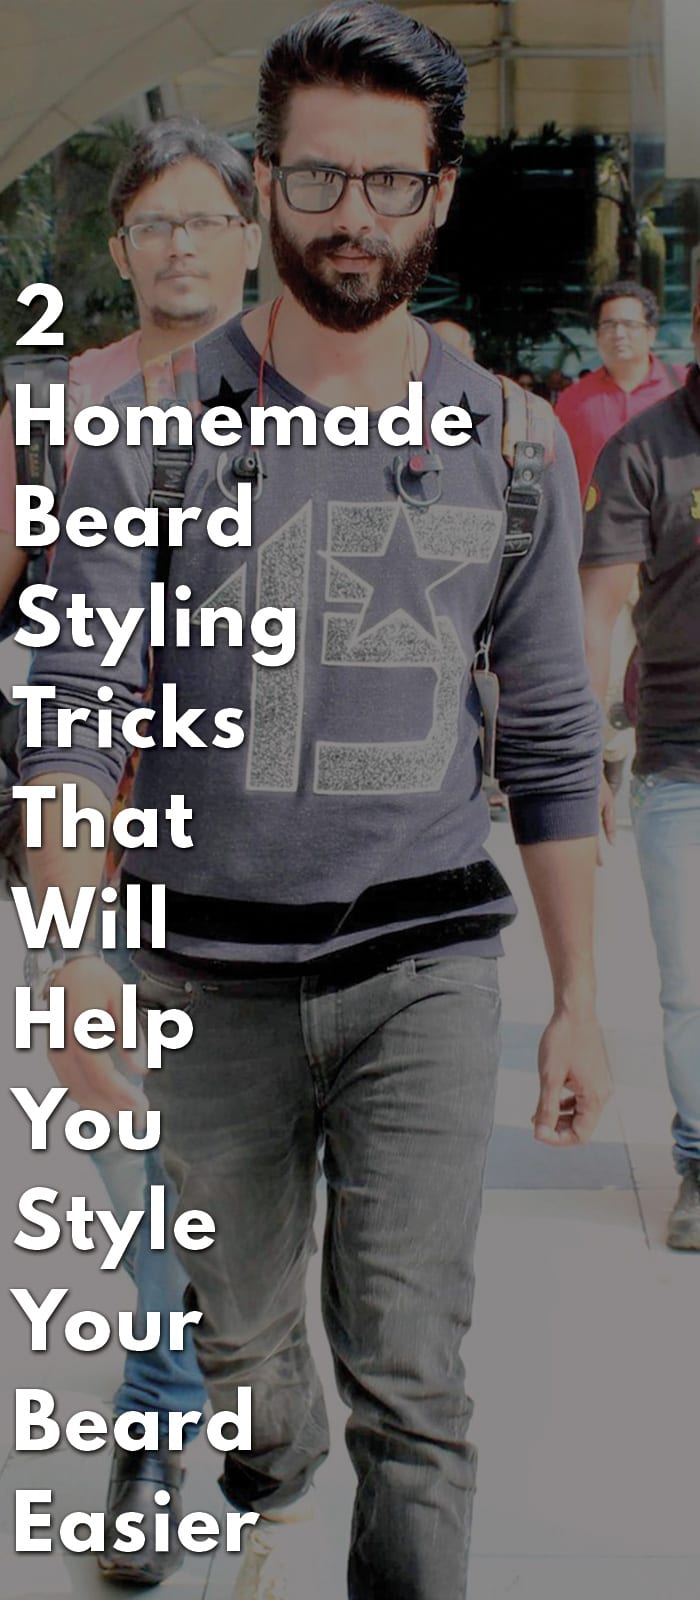 2-Homemade-Beard-Styling-Tricks-That-Will-Help-You-Style-Your-Beard-Easier